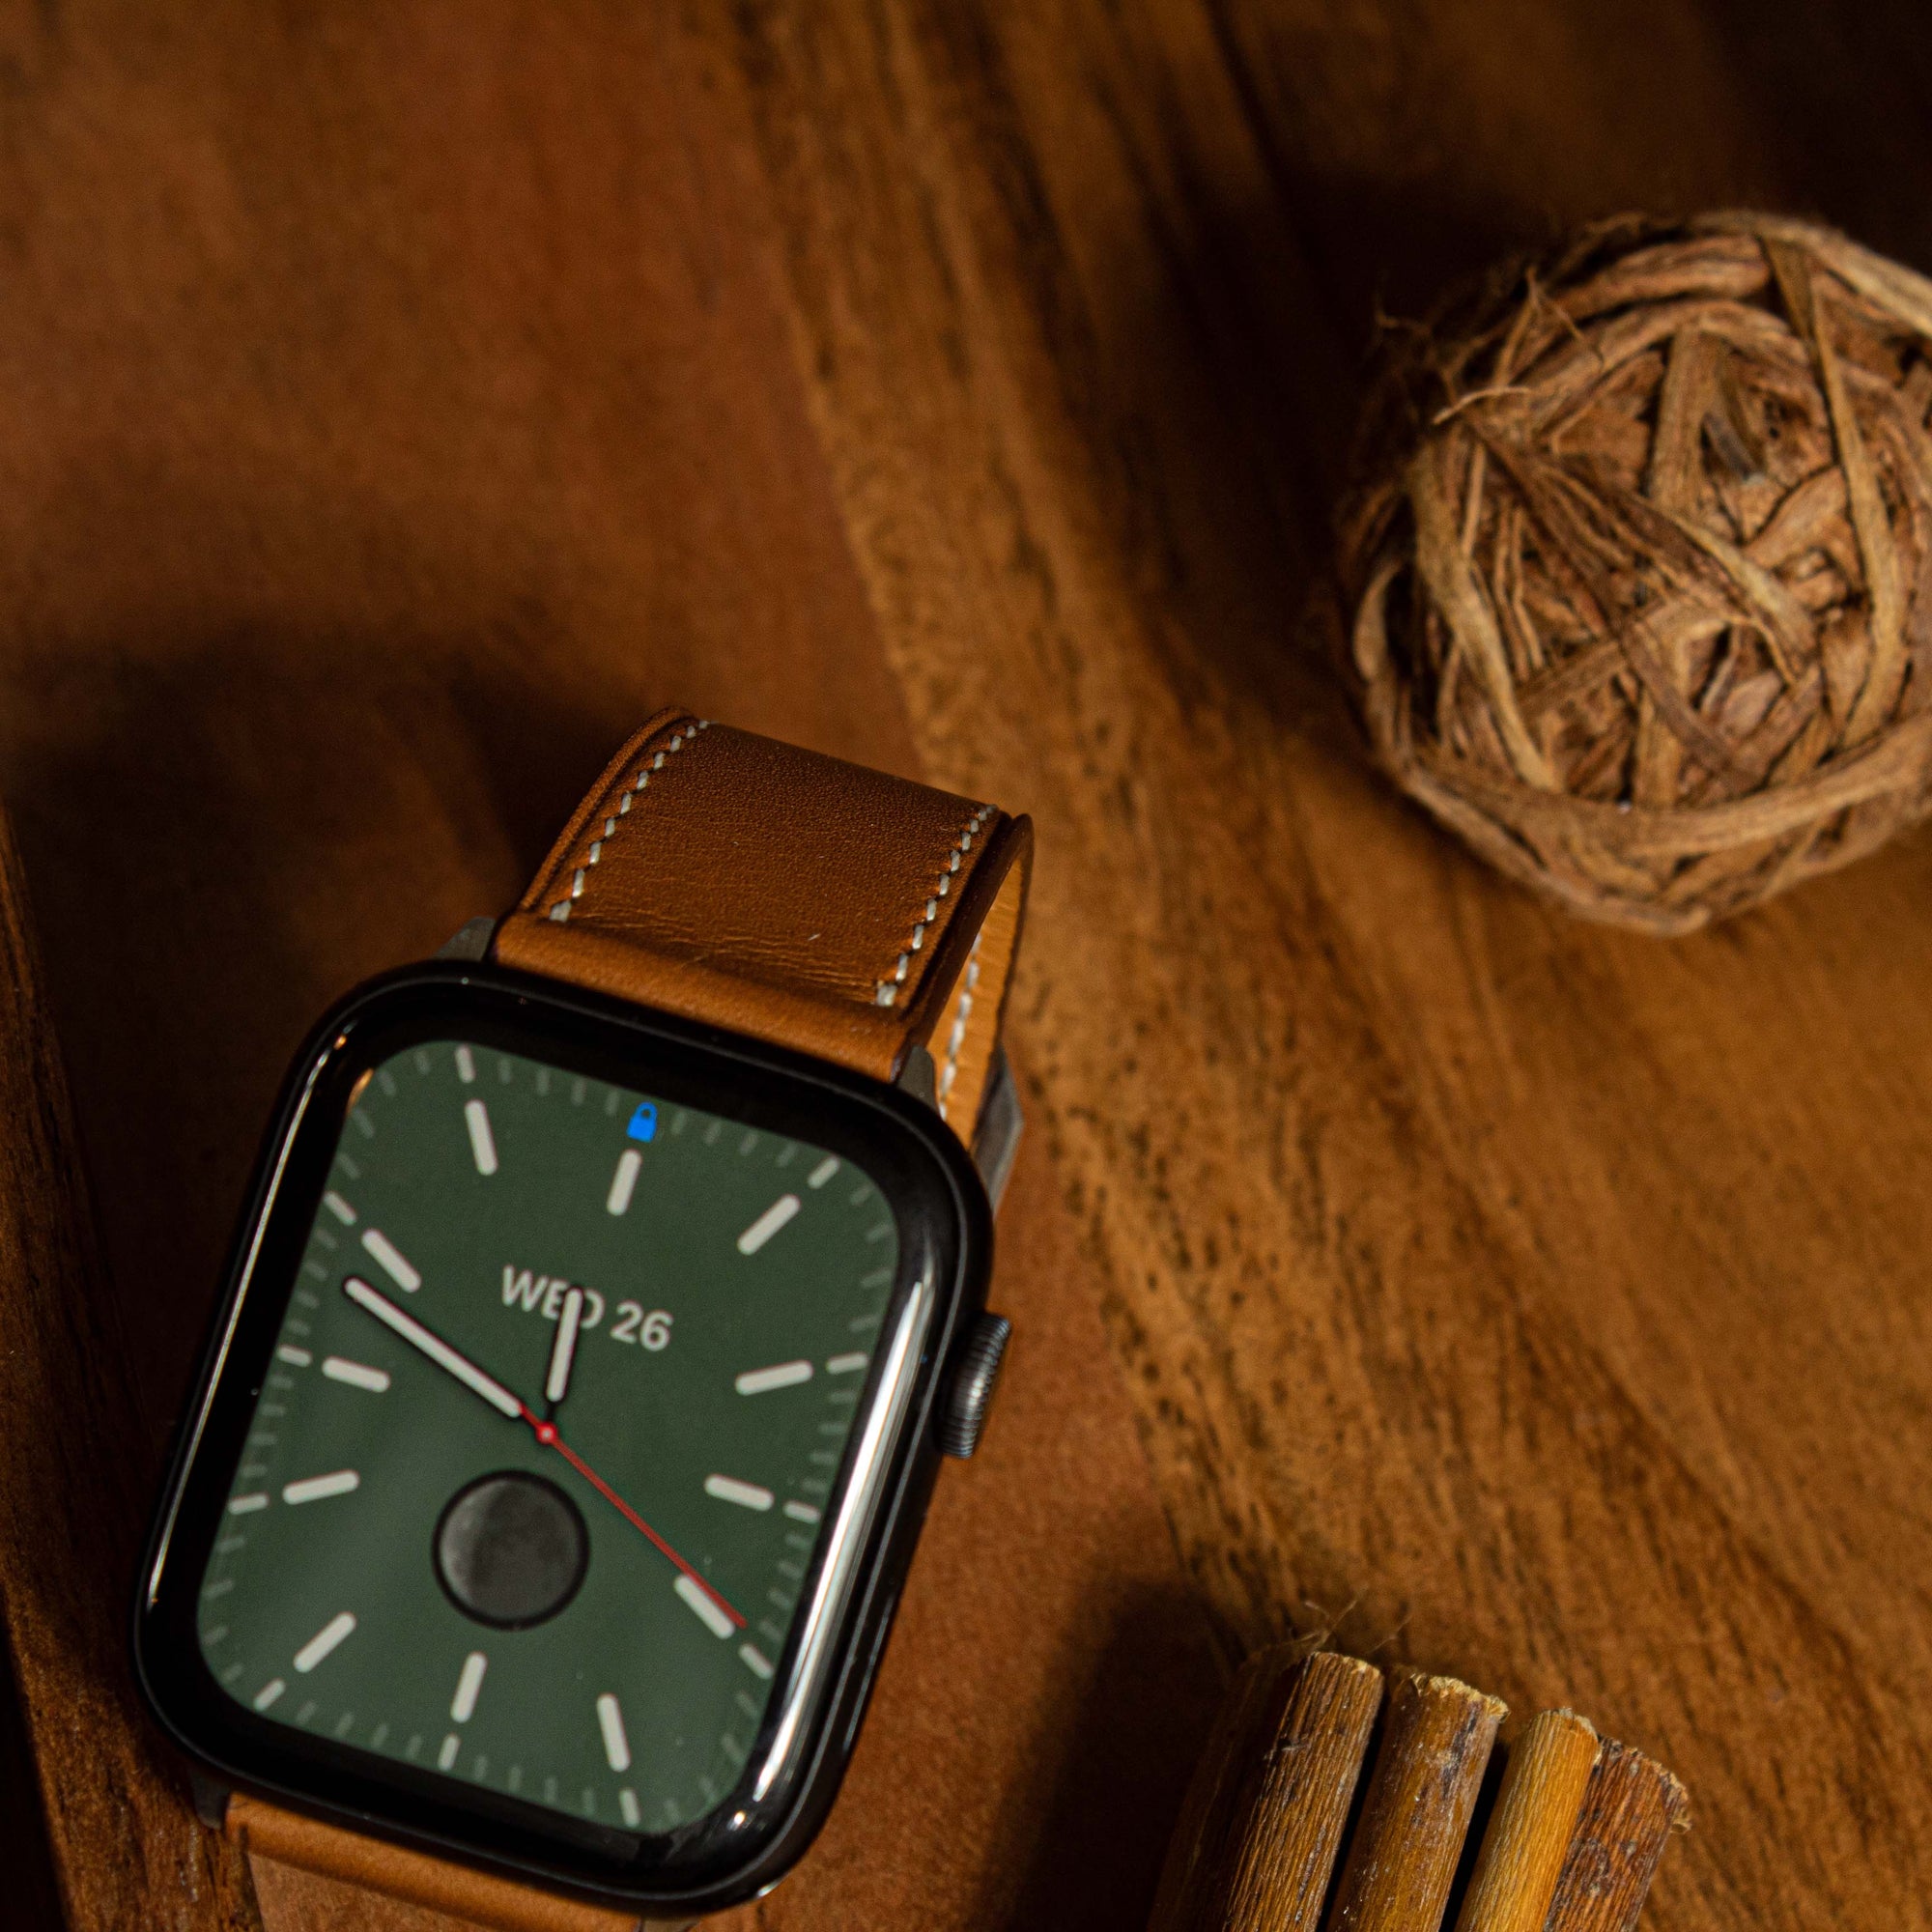 Barenia Monetial Leather Watch Bands For Apple Watch | Premium Barenia Leather